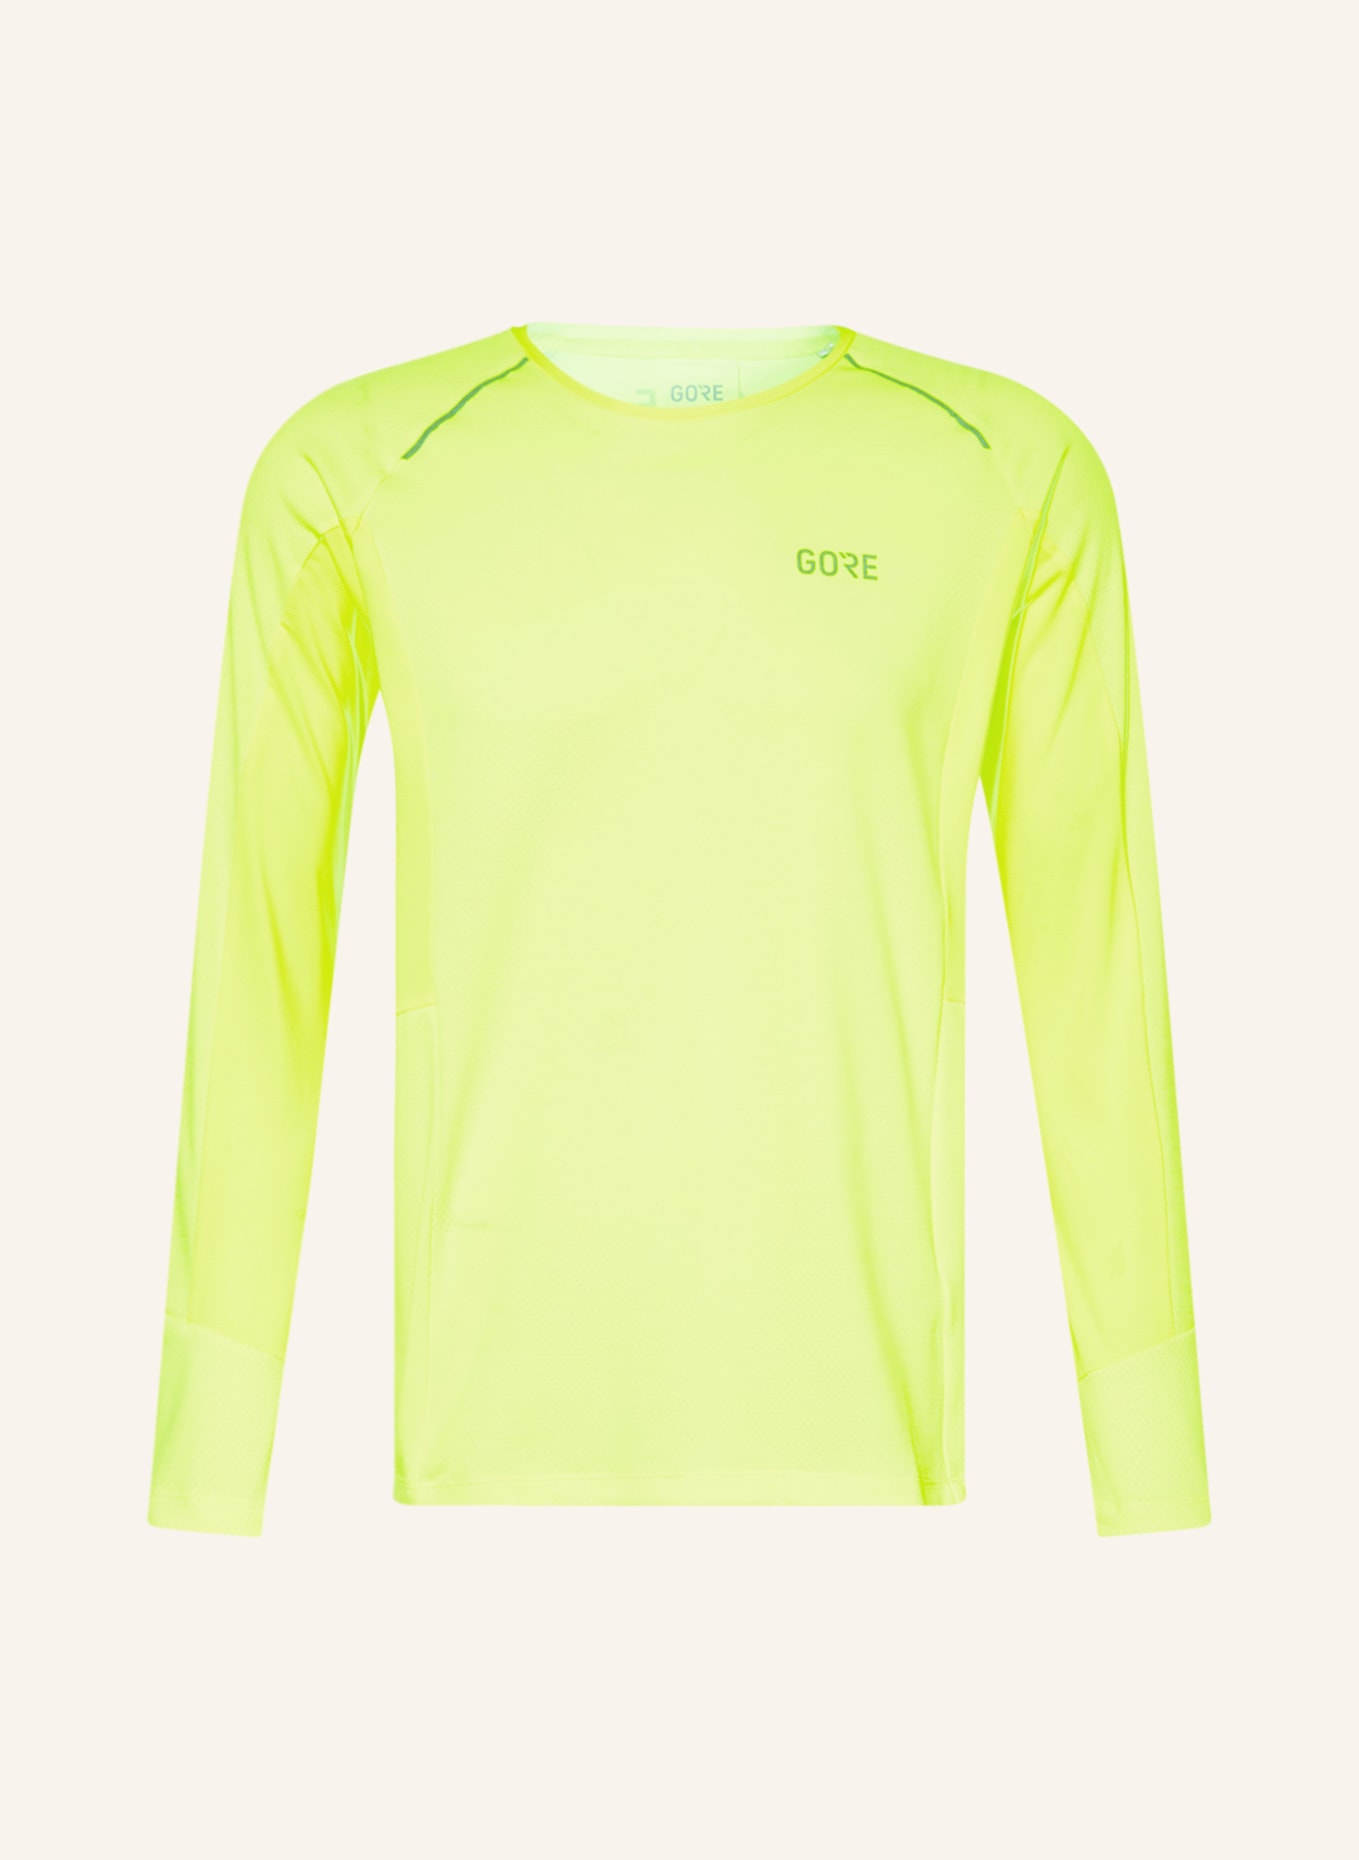 GORE RUNNING WEAR Running shirt ENERGETIC with mesh inserts, Color: NEON YELLOW (Image 1)